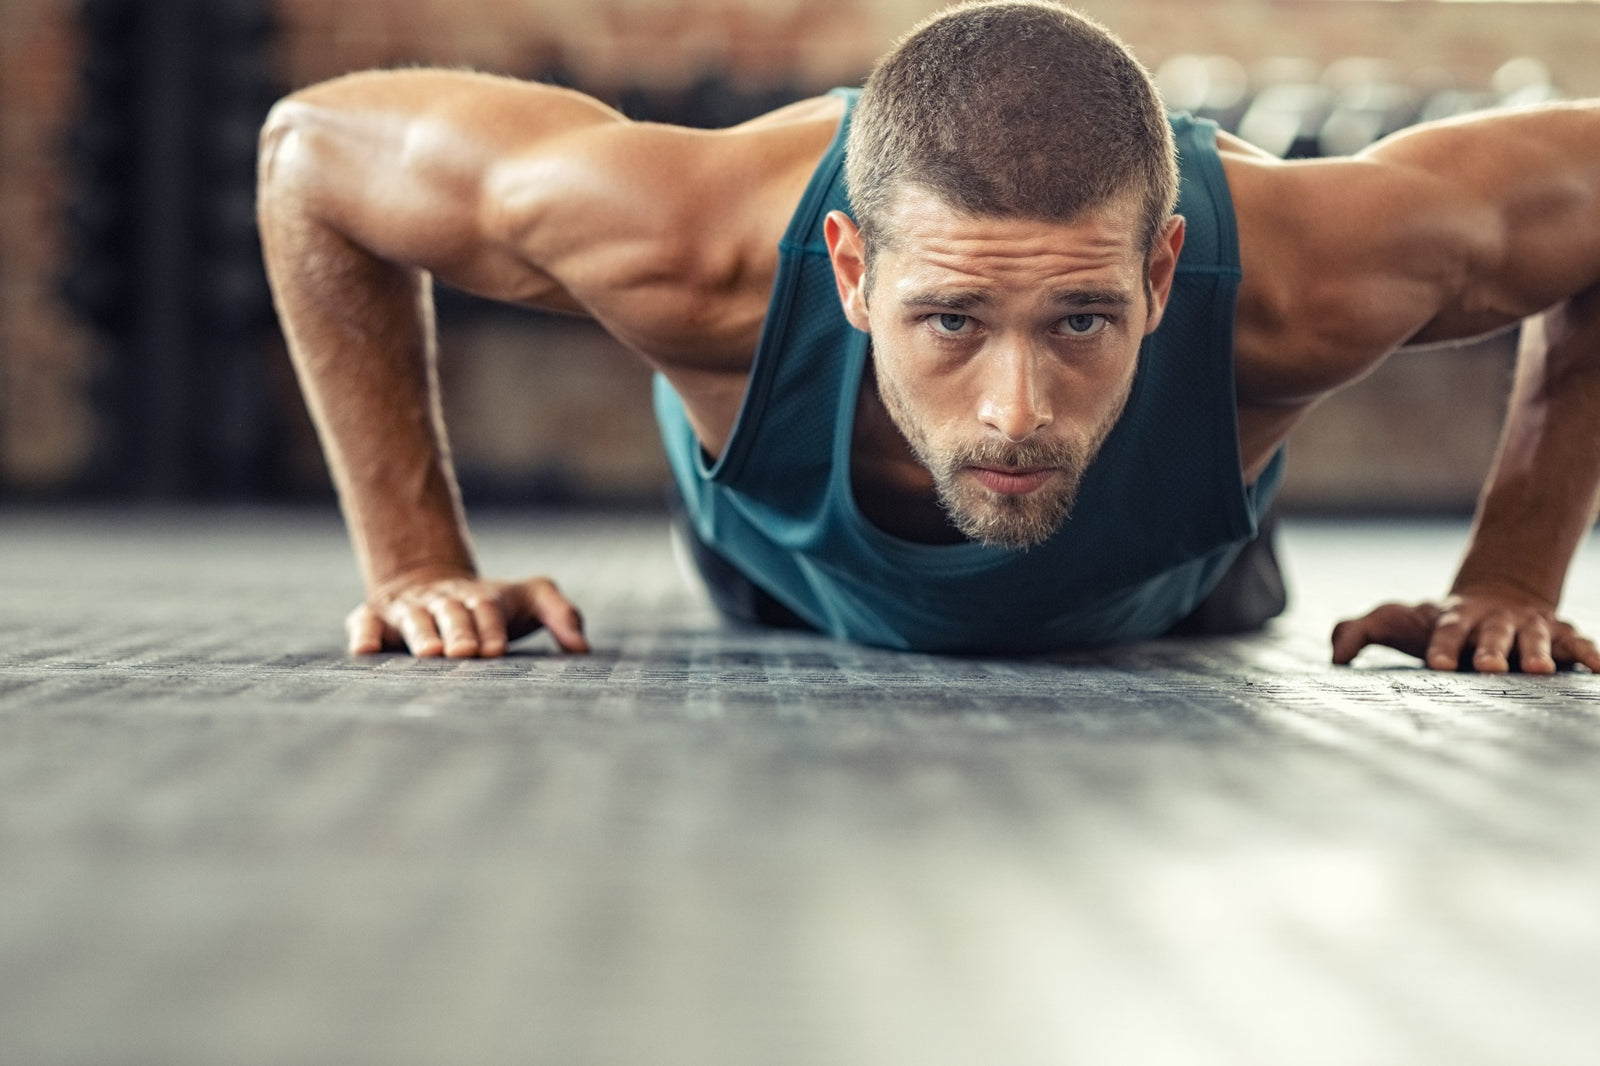 Benefits of Push-Ups  How to Do a Proper Push-Up